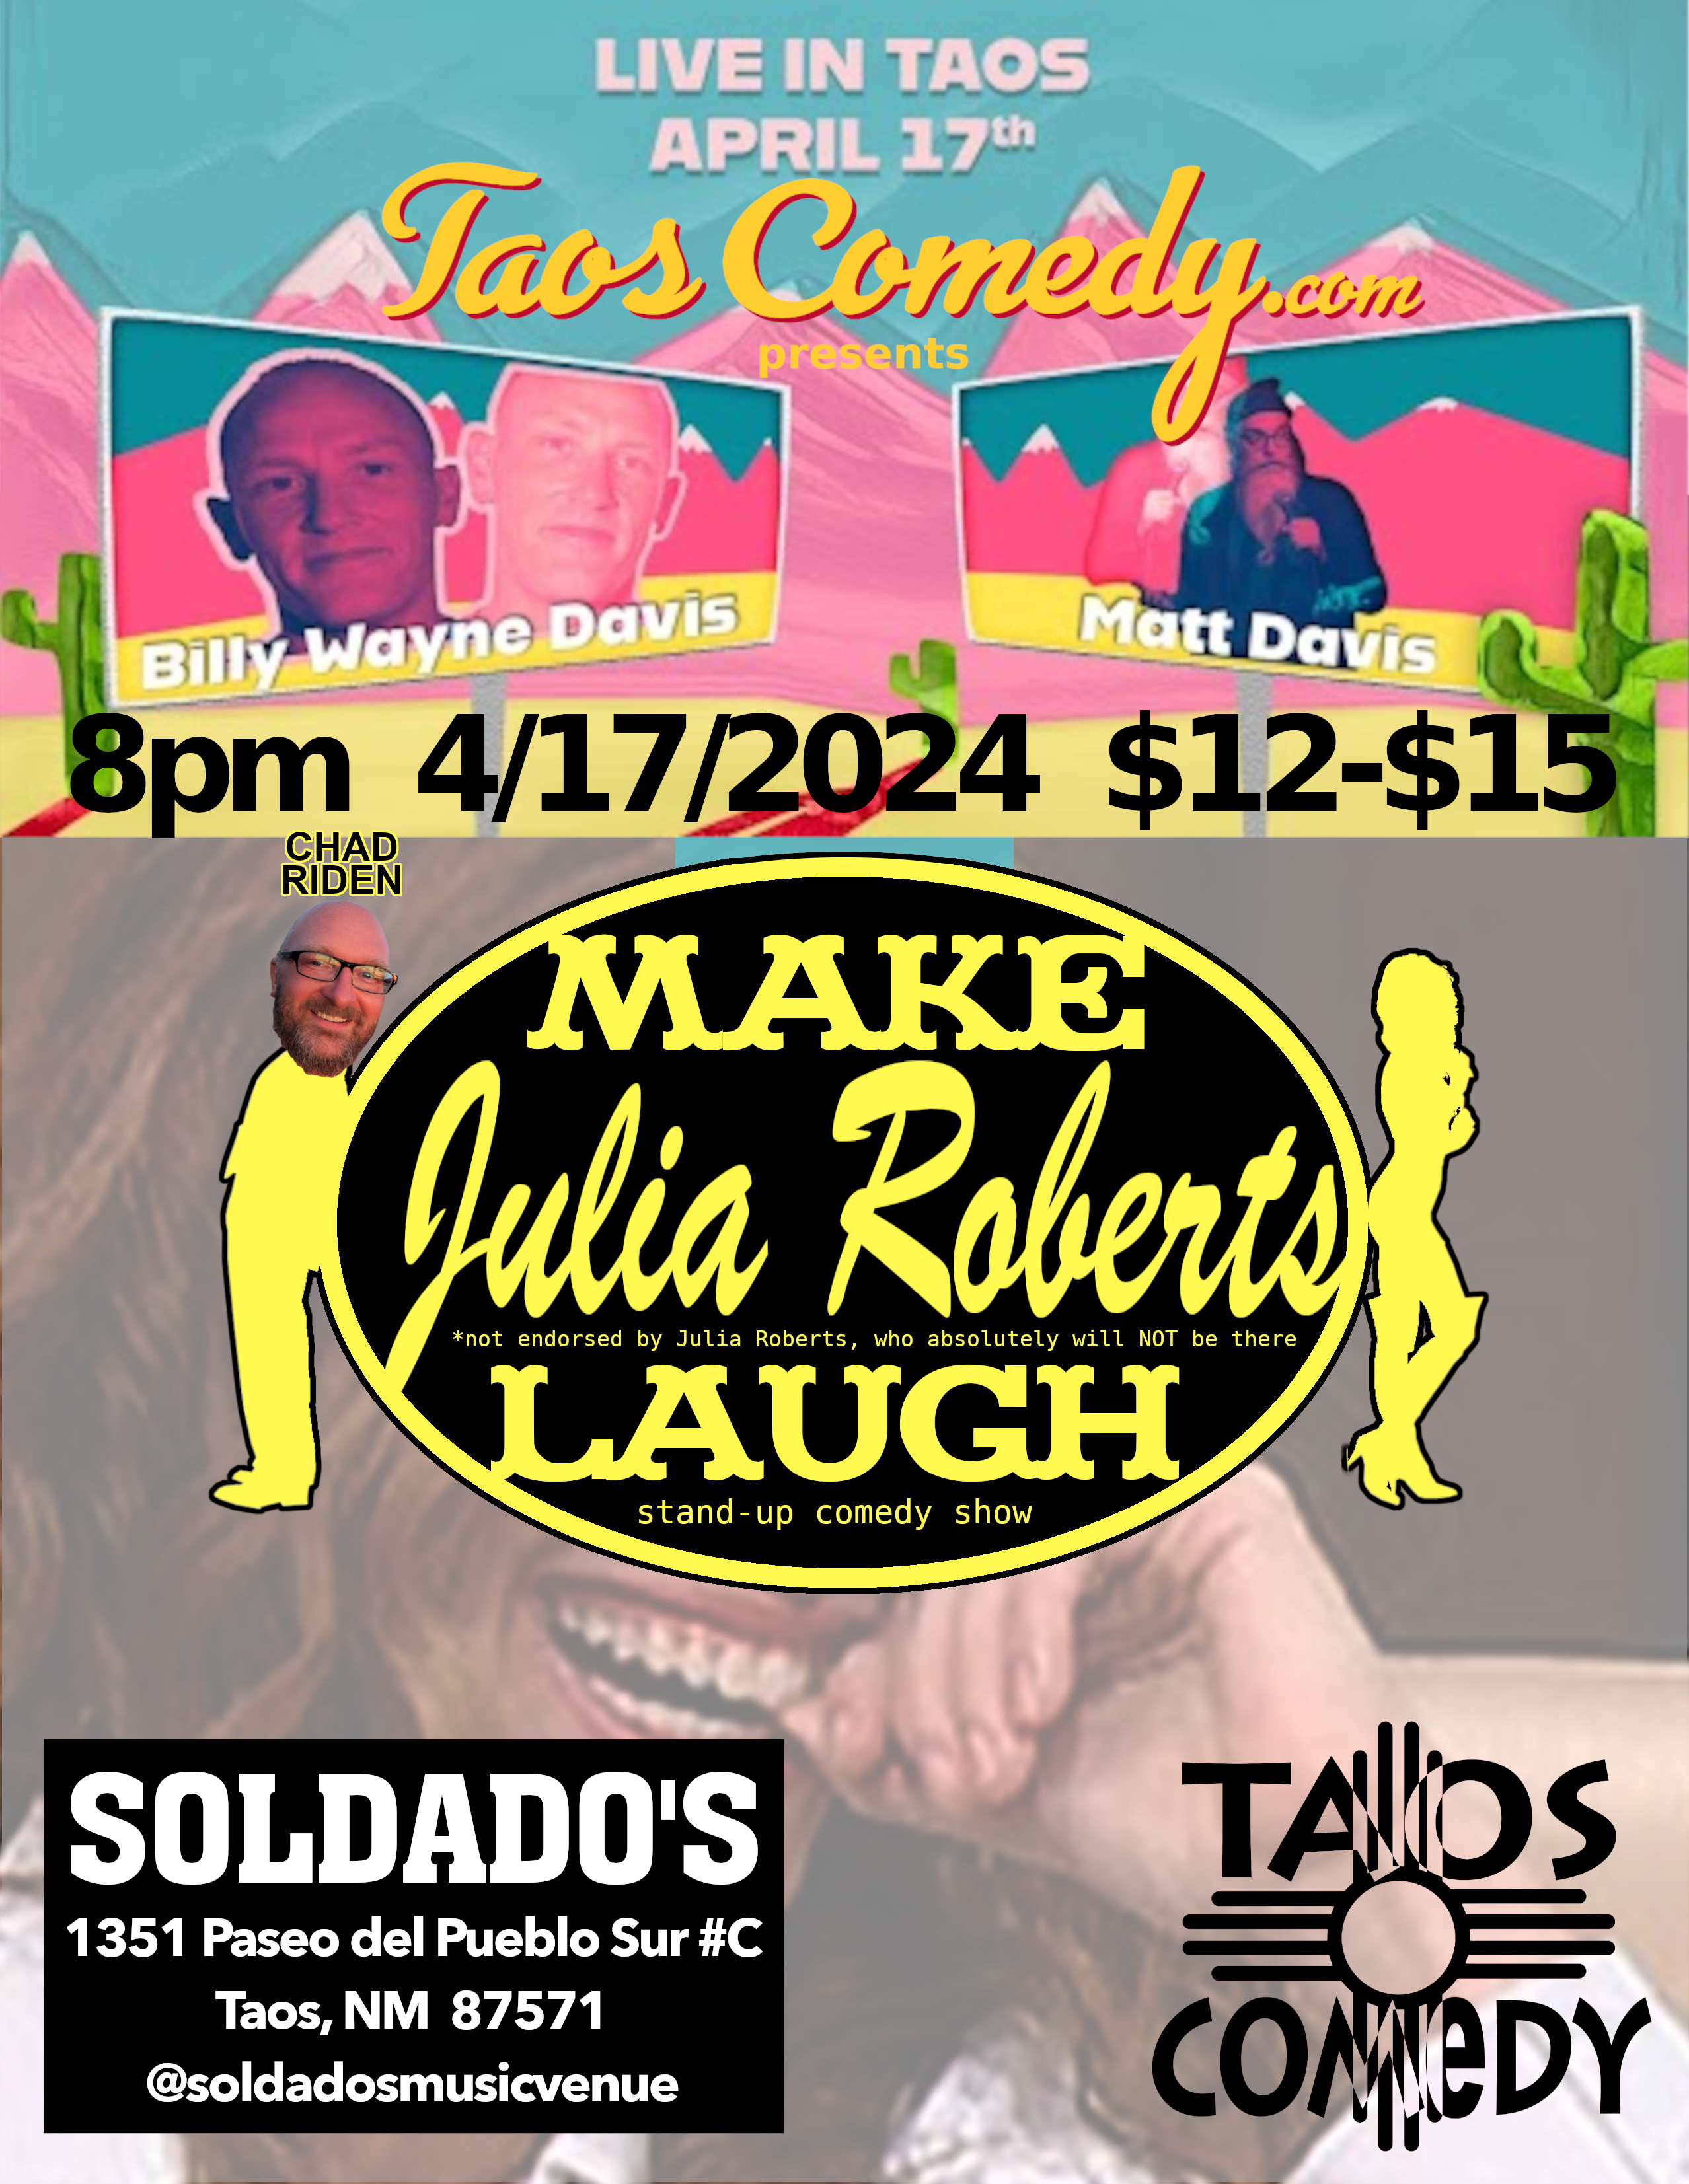 Billy Wayne Davis and Matt Davis Make Julia Roberts Laugh stand-up comedy show at Soldado's 4/17/2024. *not endorsed by Julia Roberts, who absolutely will NOT be there.